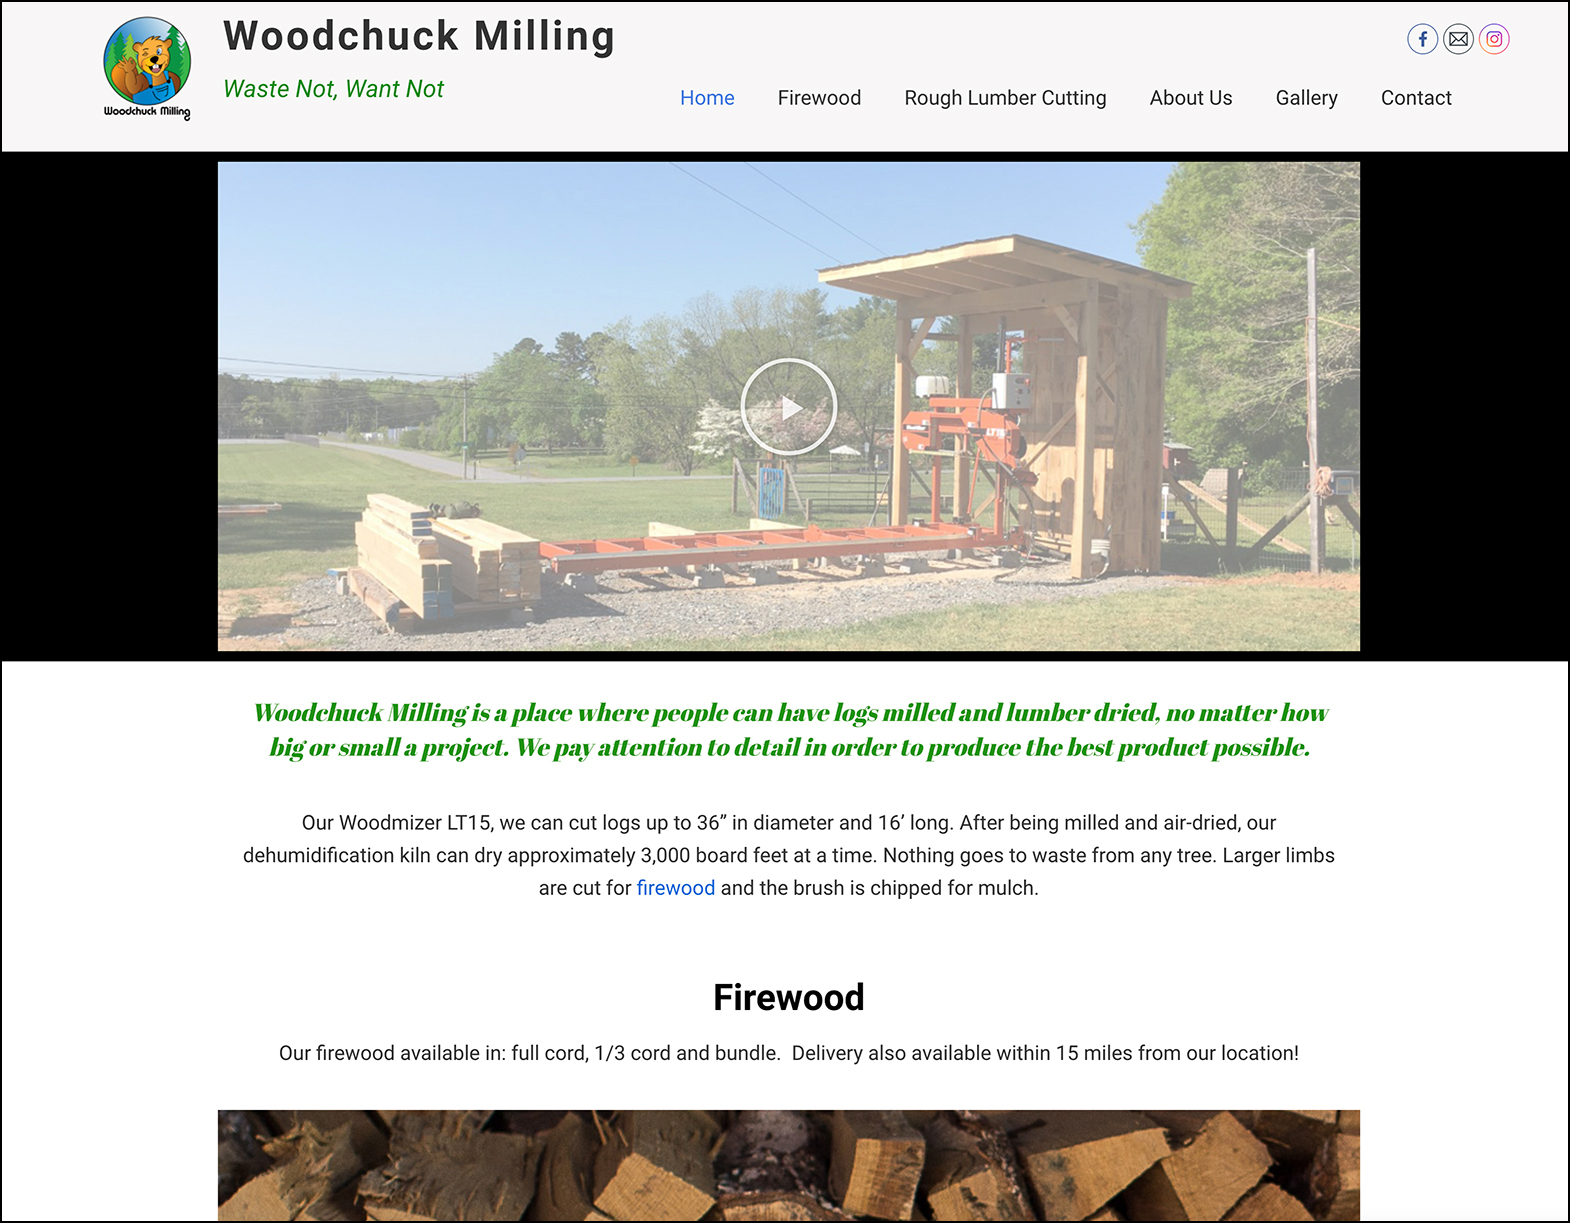 Woodchuck Milling, click to learn more